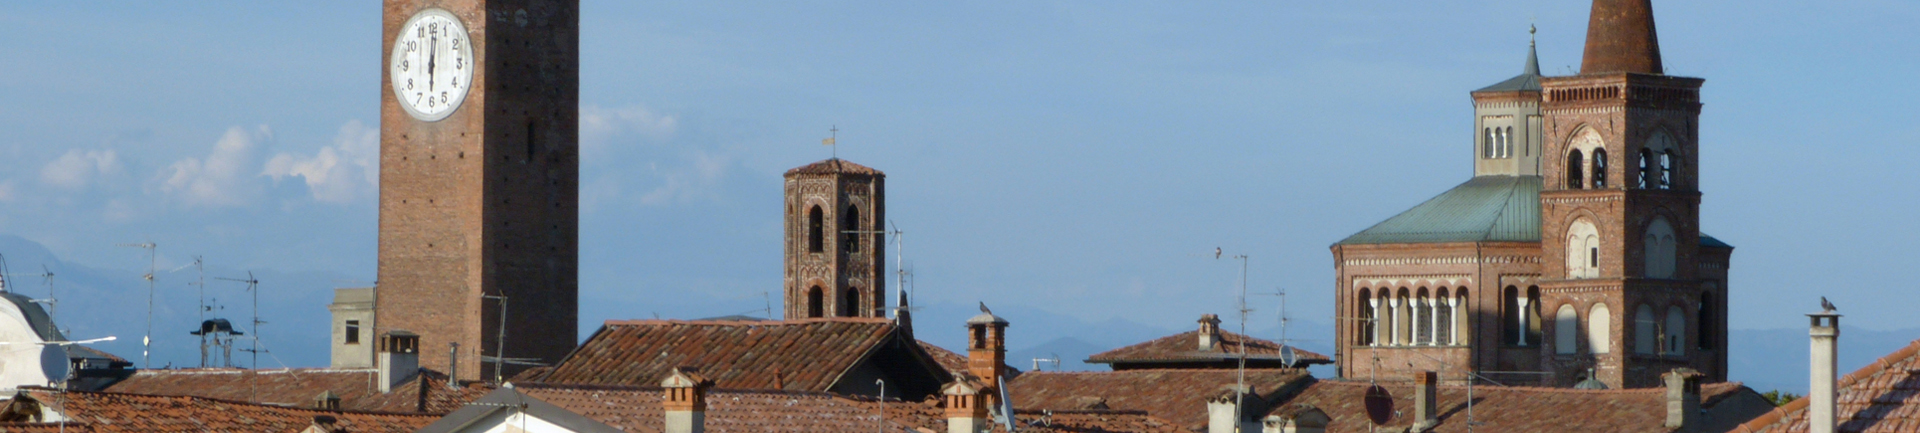 Borgo di Soncino. An open air museum in the land of pleasures.